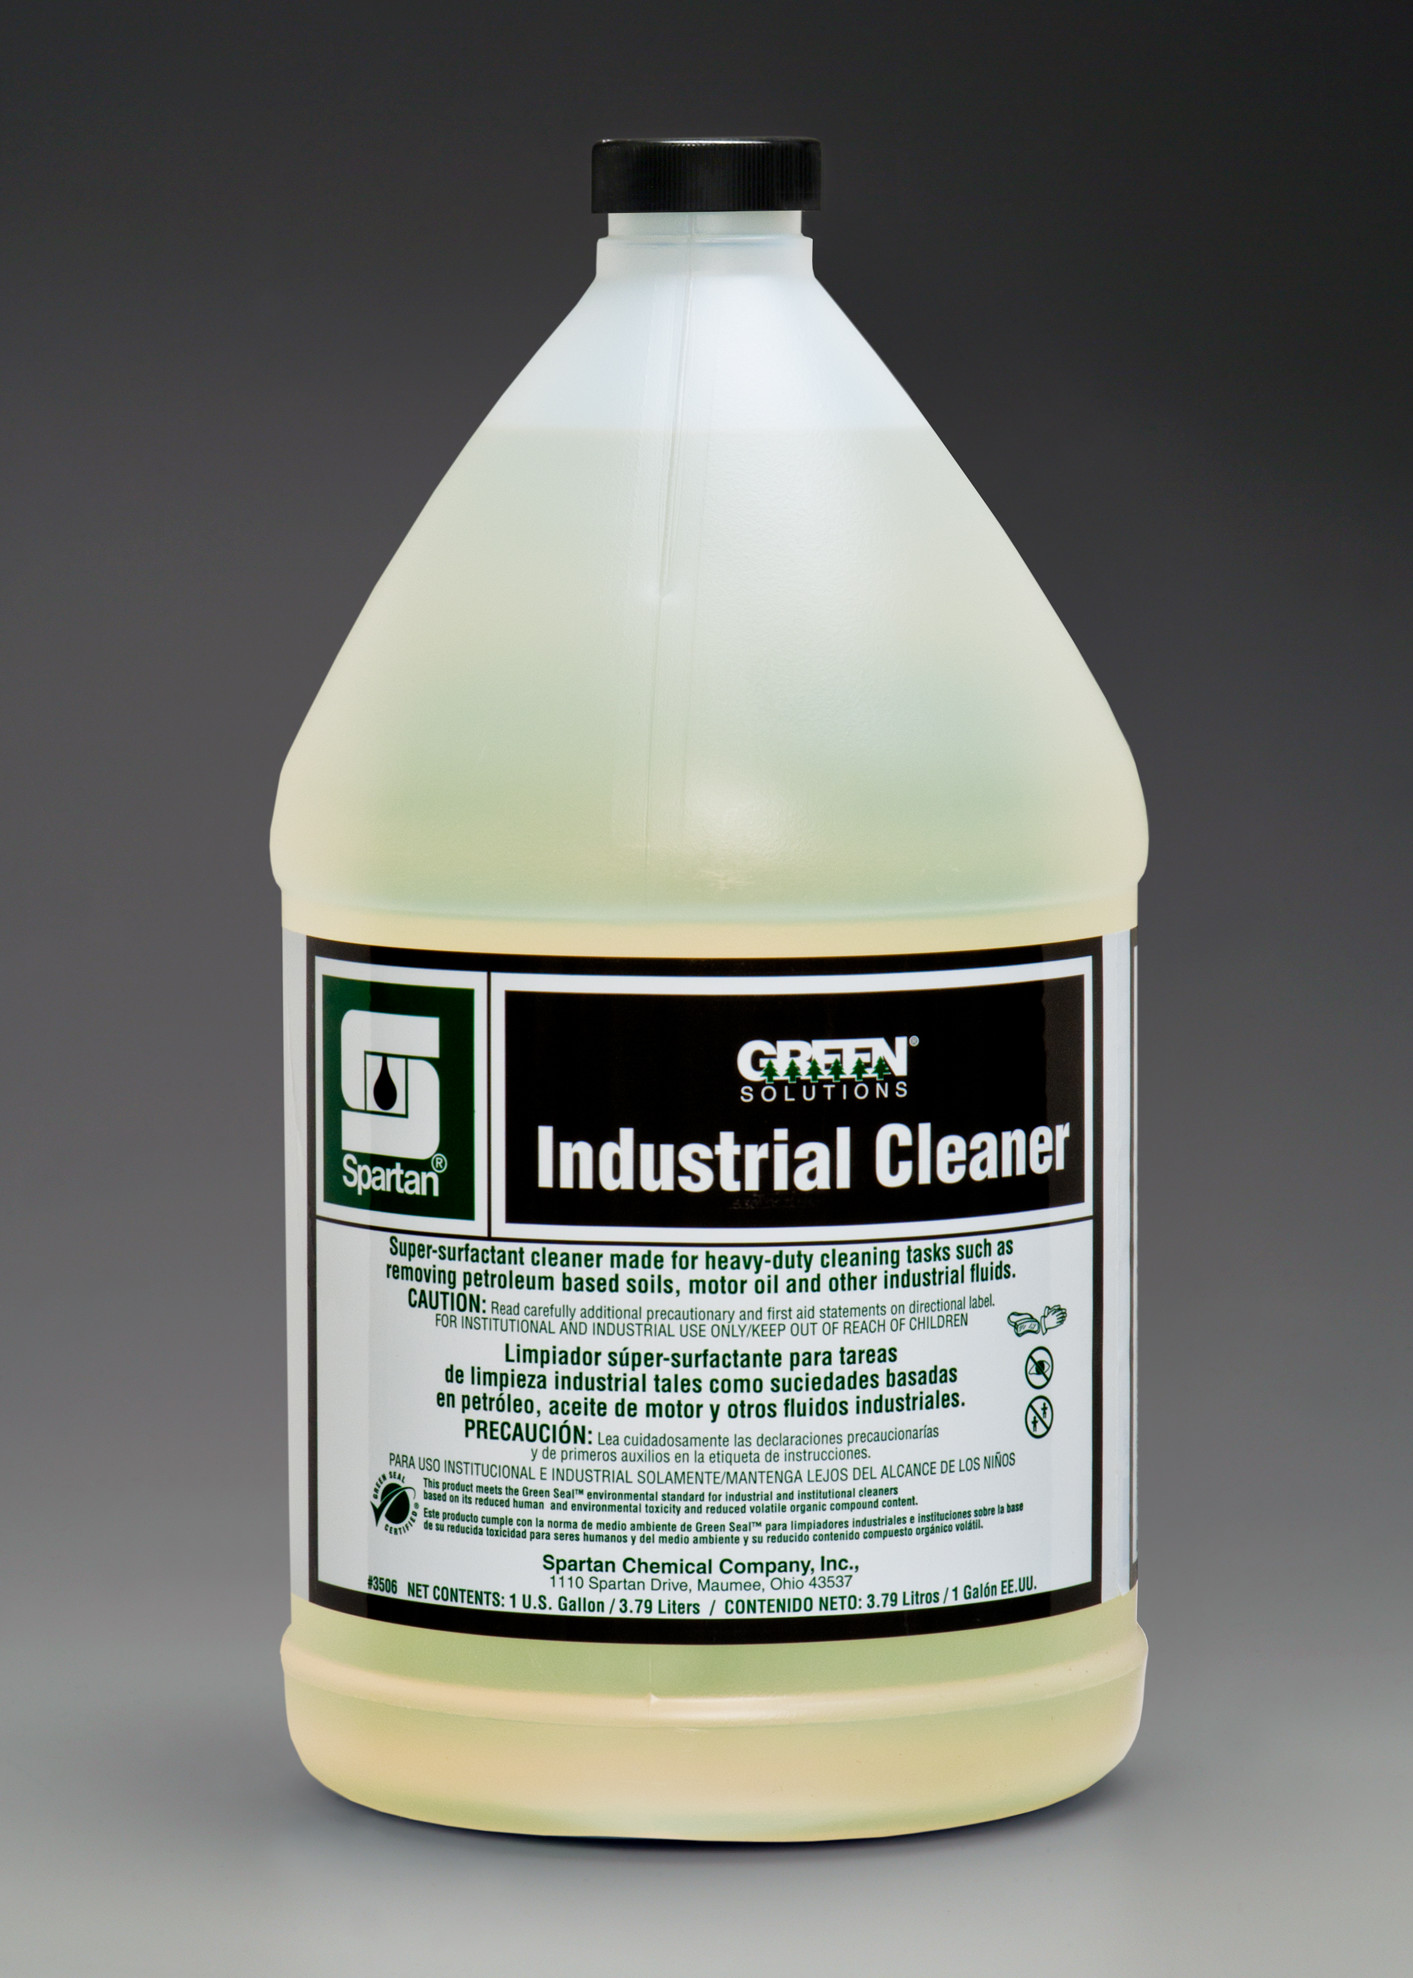 Green+Solutions+Industrial+Cleaner+%7B1+gallon+%284+per+case%29%7D